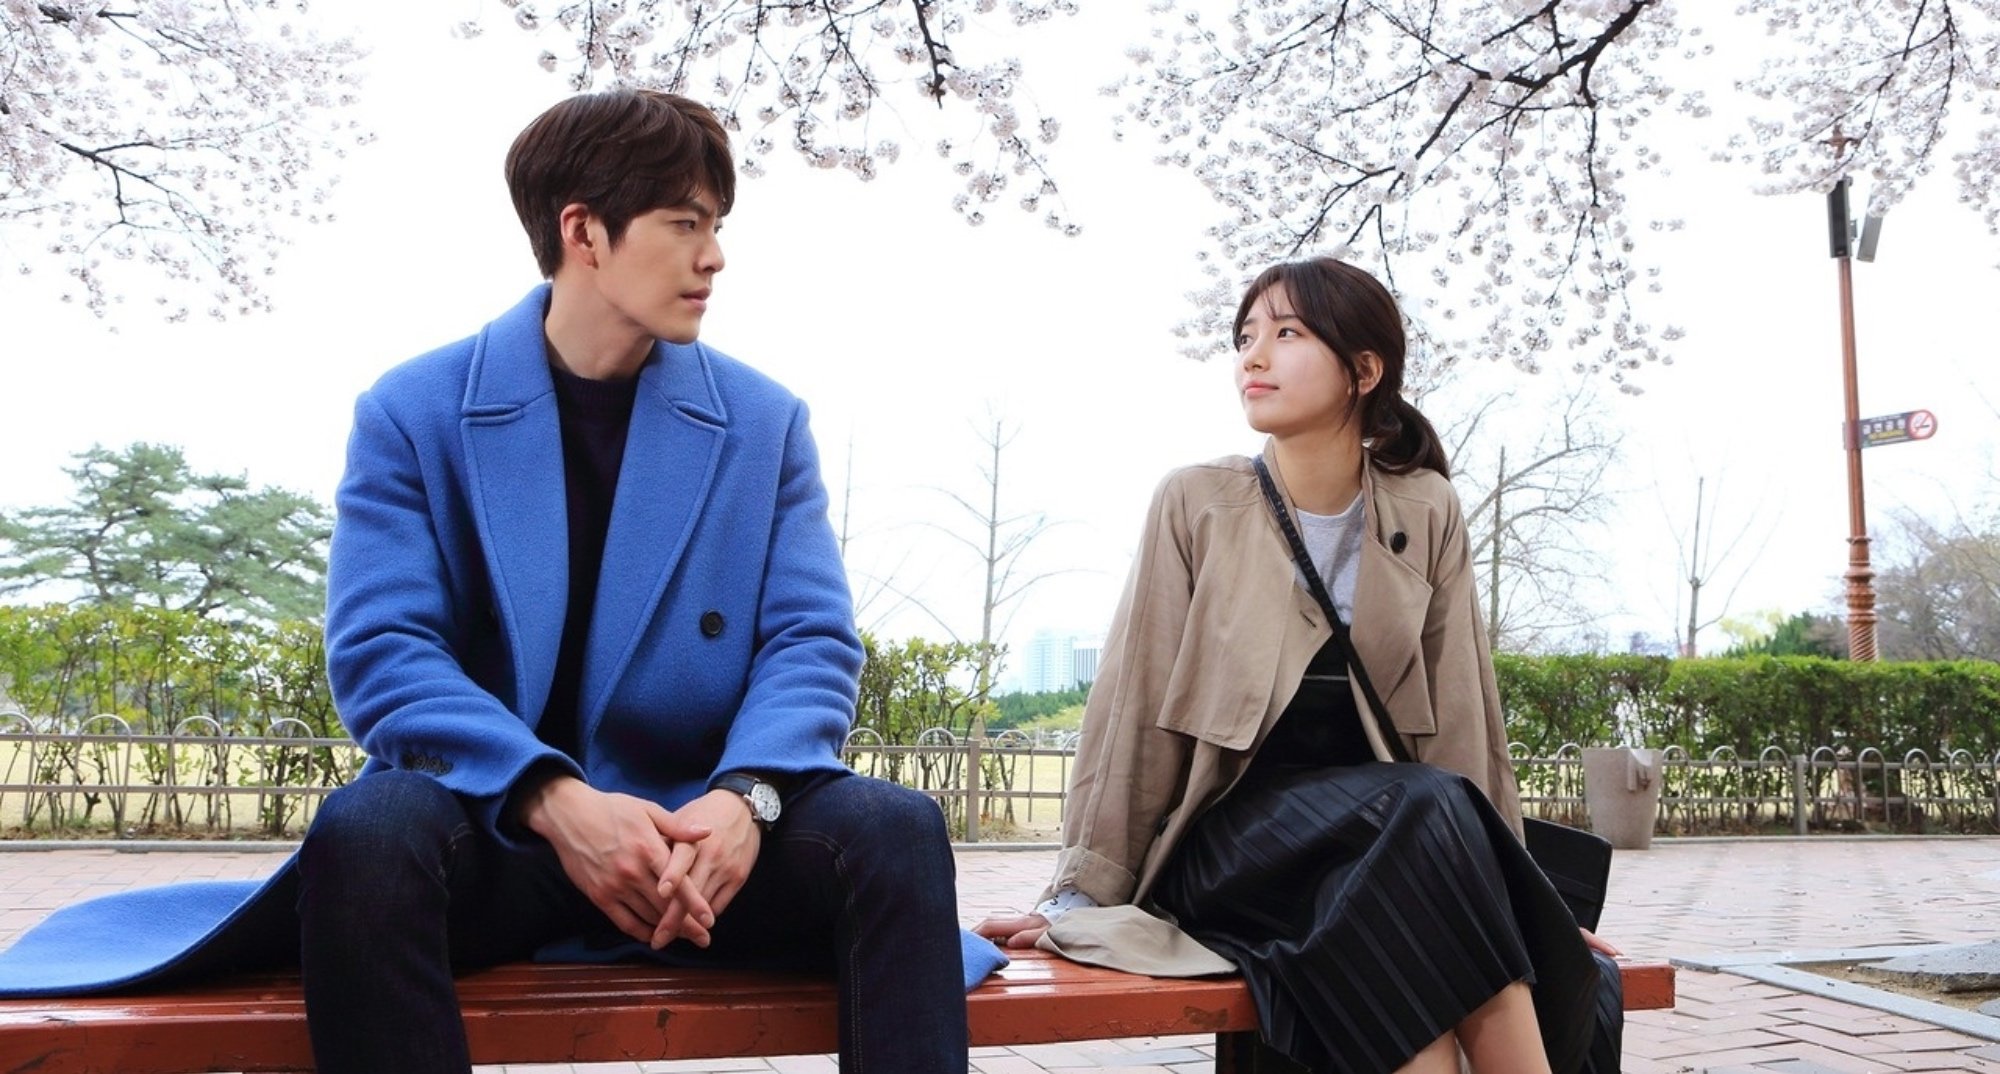 Kim Woo-bin and Bae Suzy for 'Uncontrollably Fond' Valentine's Day romance K-drama sitting on bench outside.